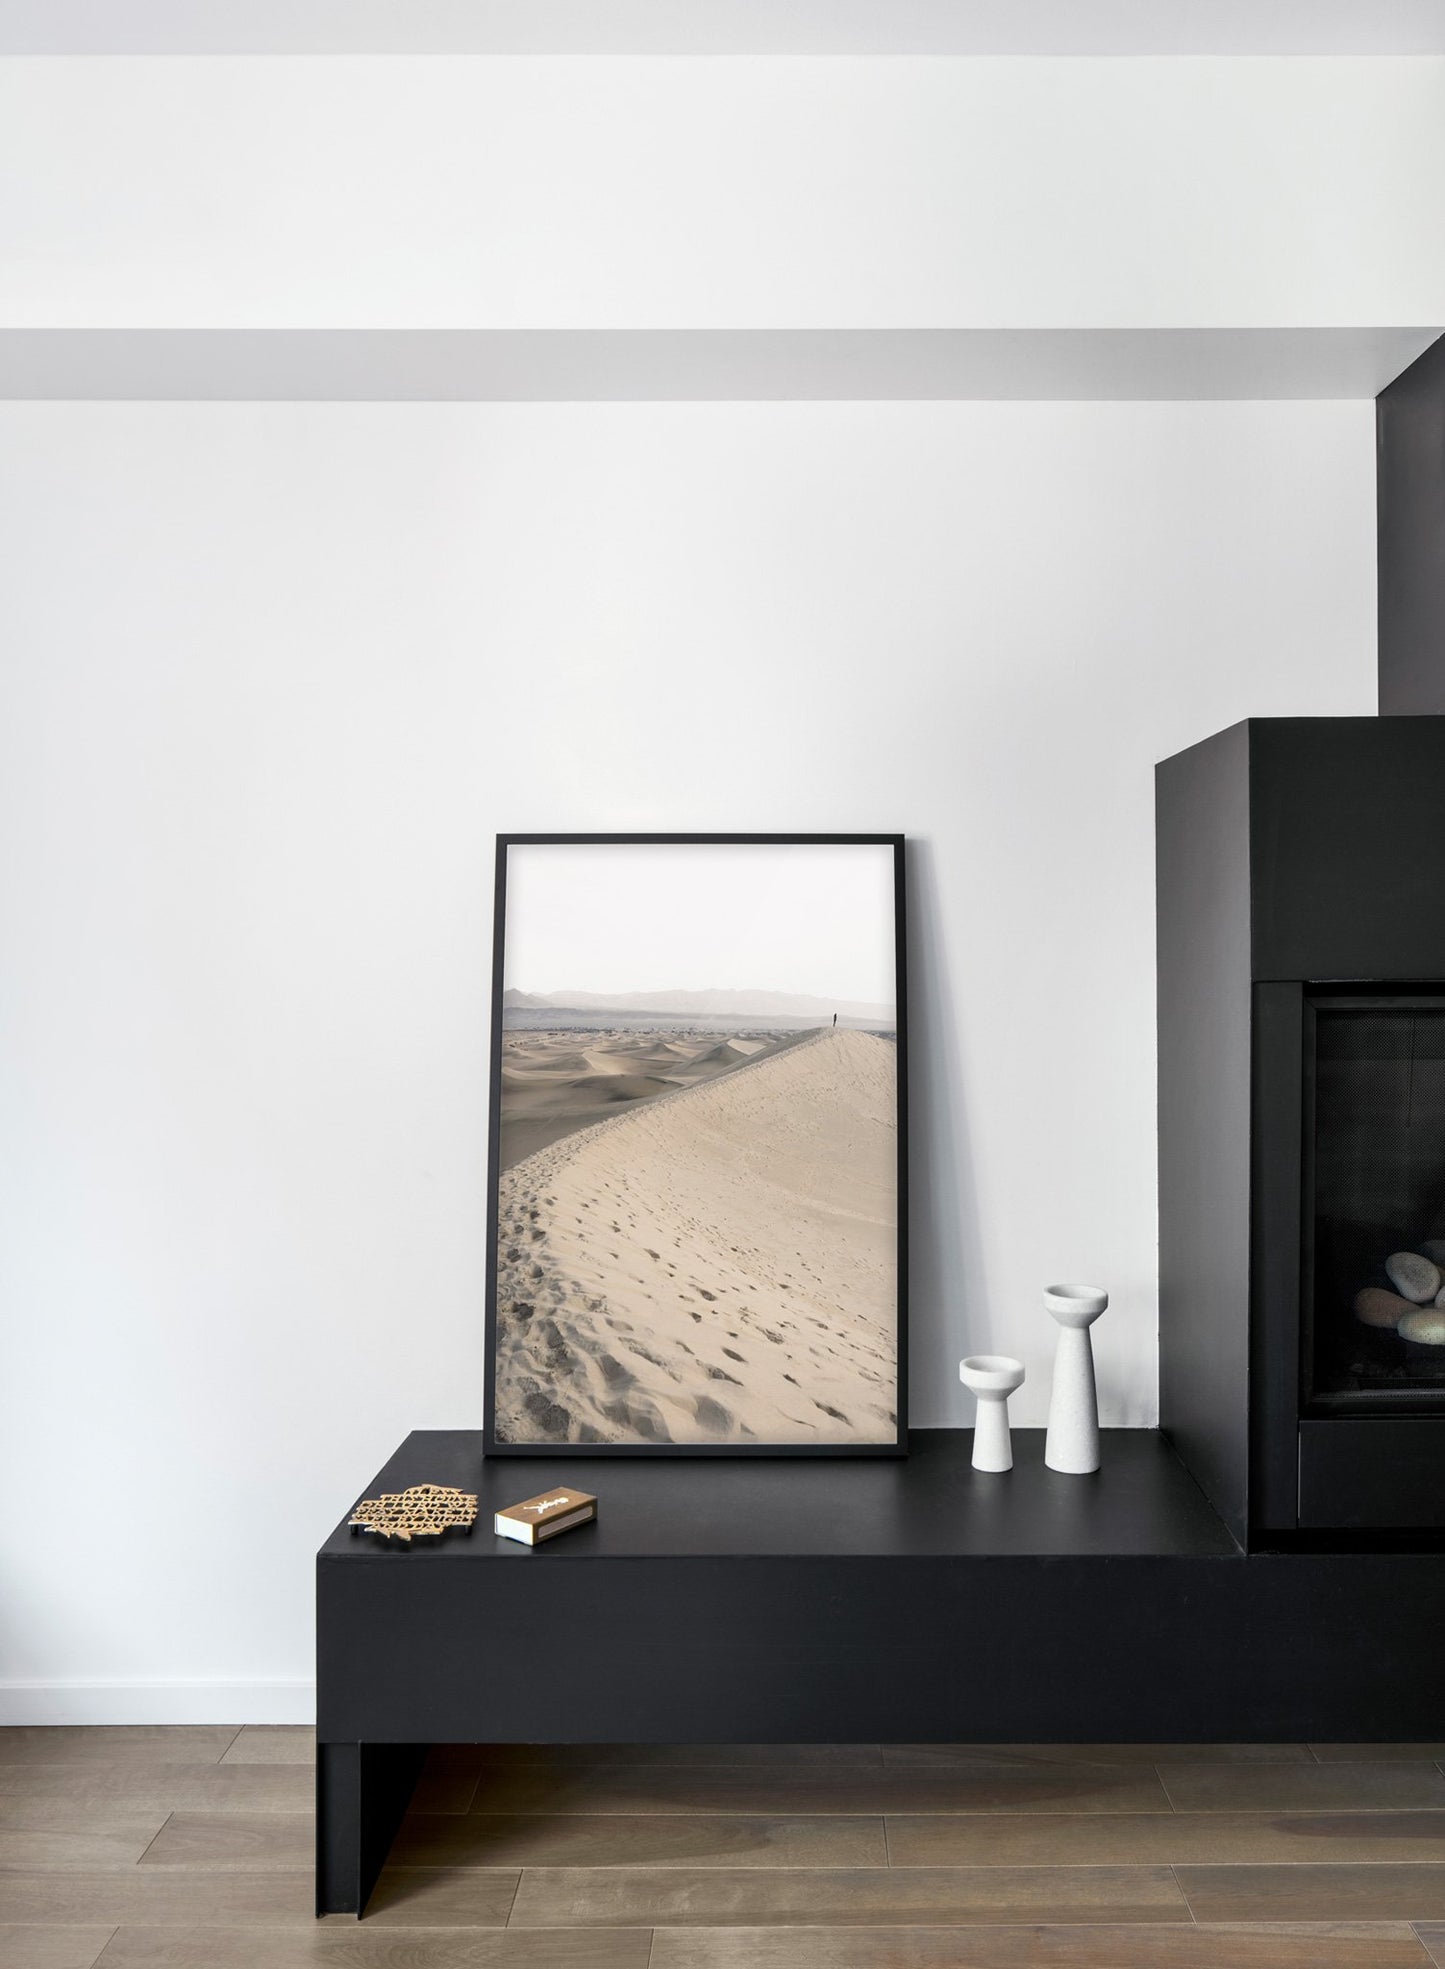 Solitude in the Desert - Sand desert modern minimalist photography poster by Opposite Wall - Living room with fireplace